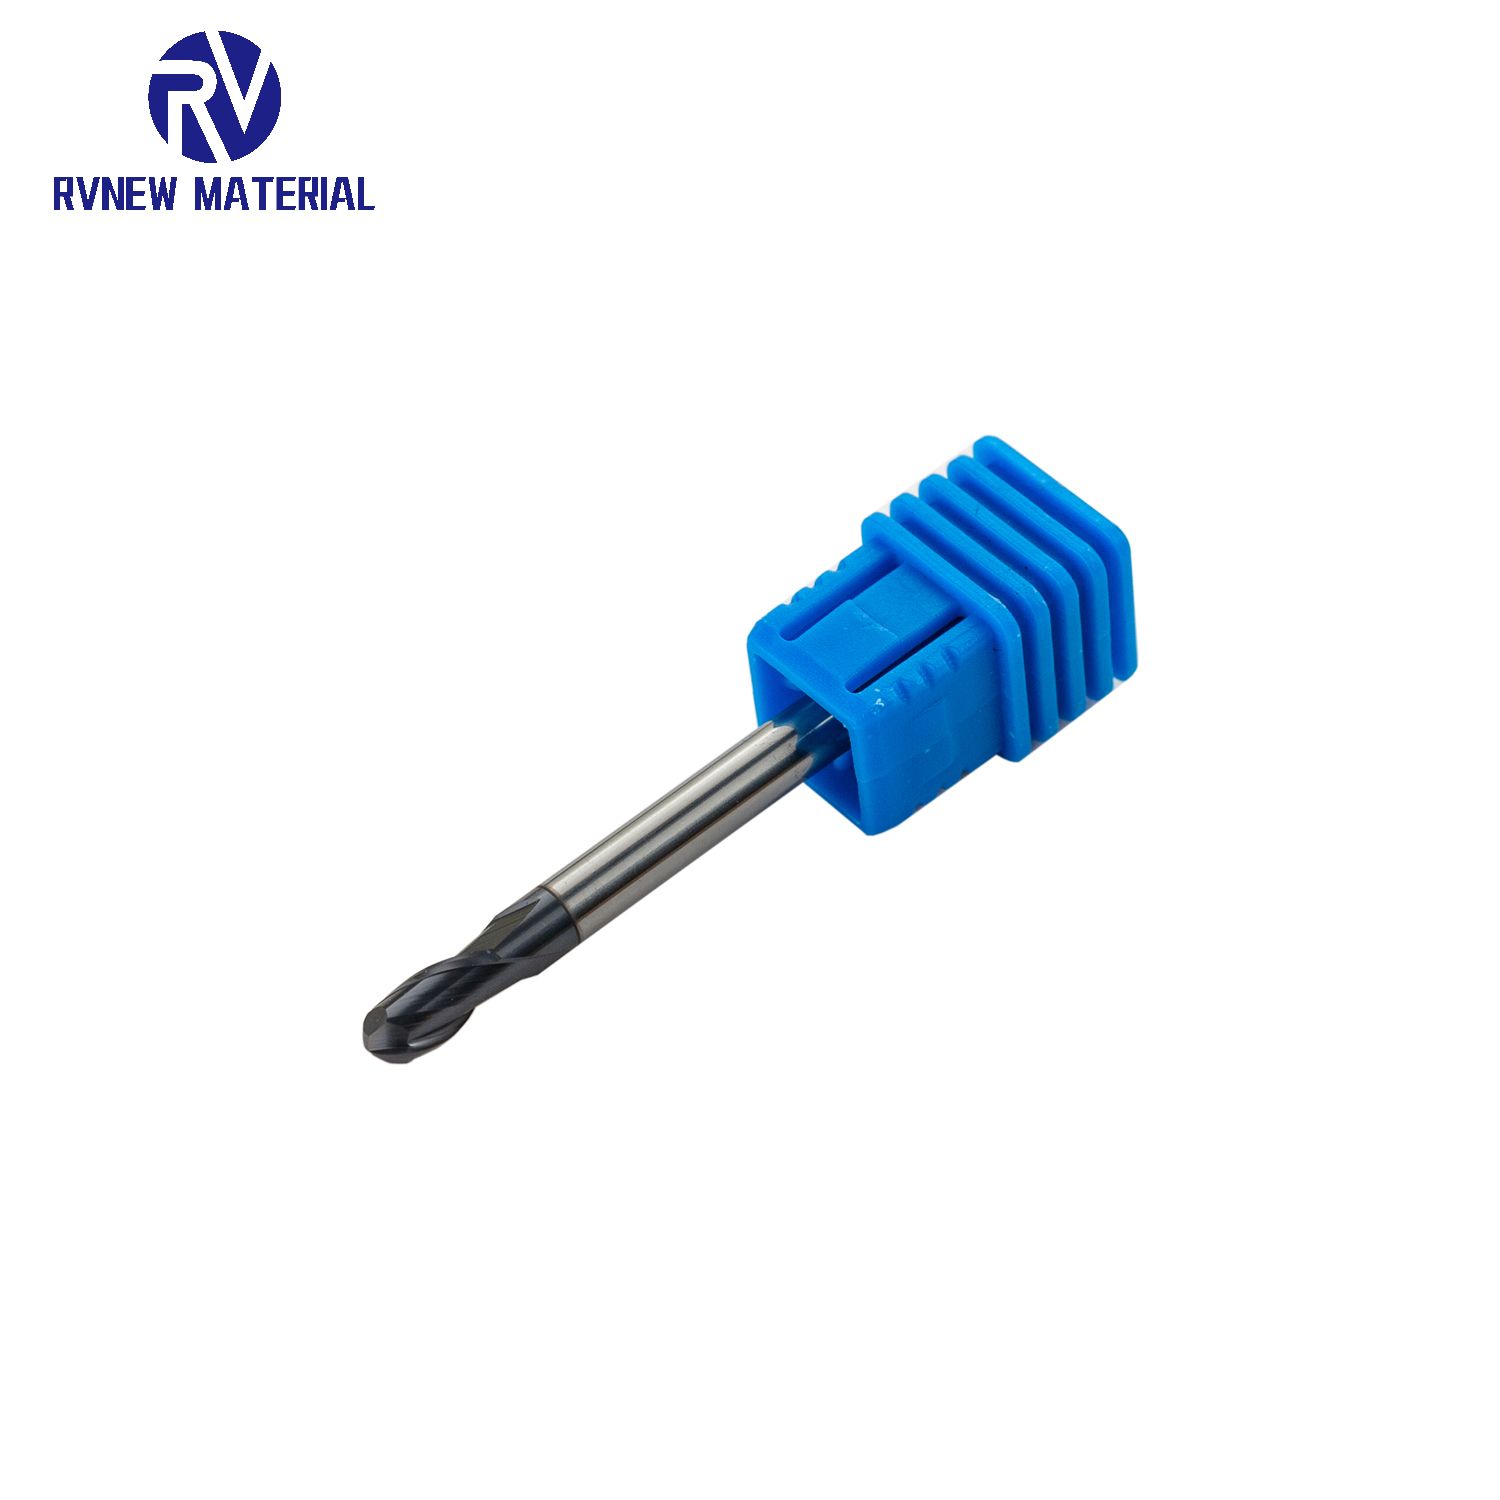 RV machining ball nose milling cutter end mills processing tungsten carbide milling